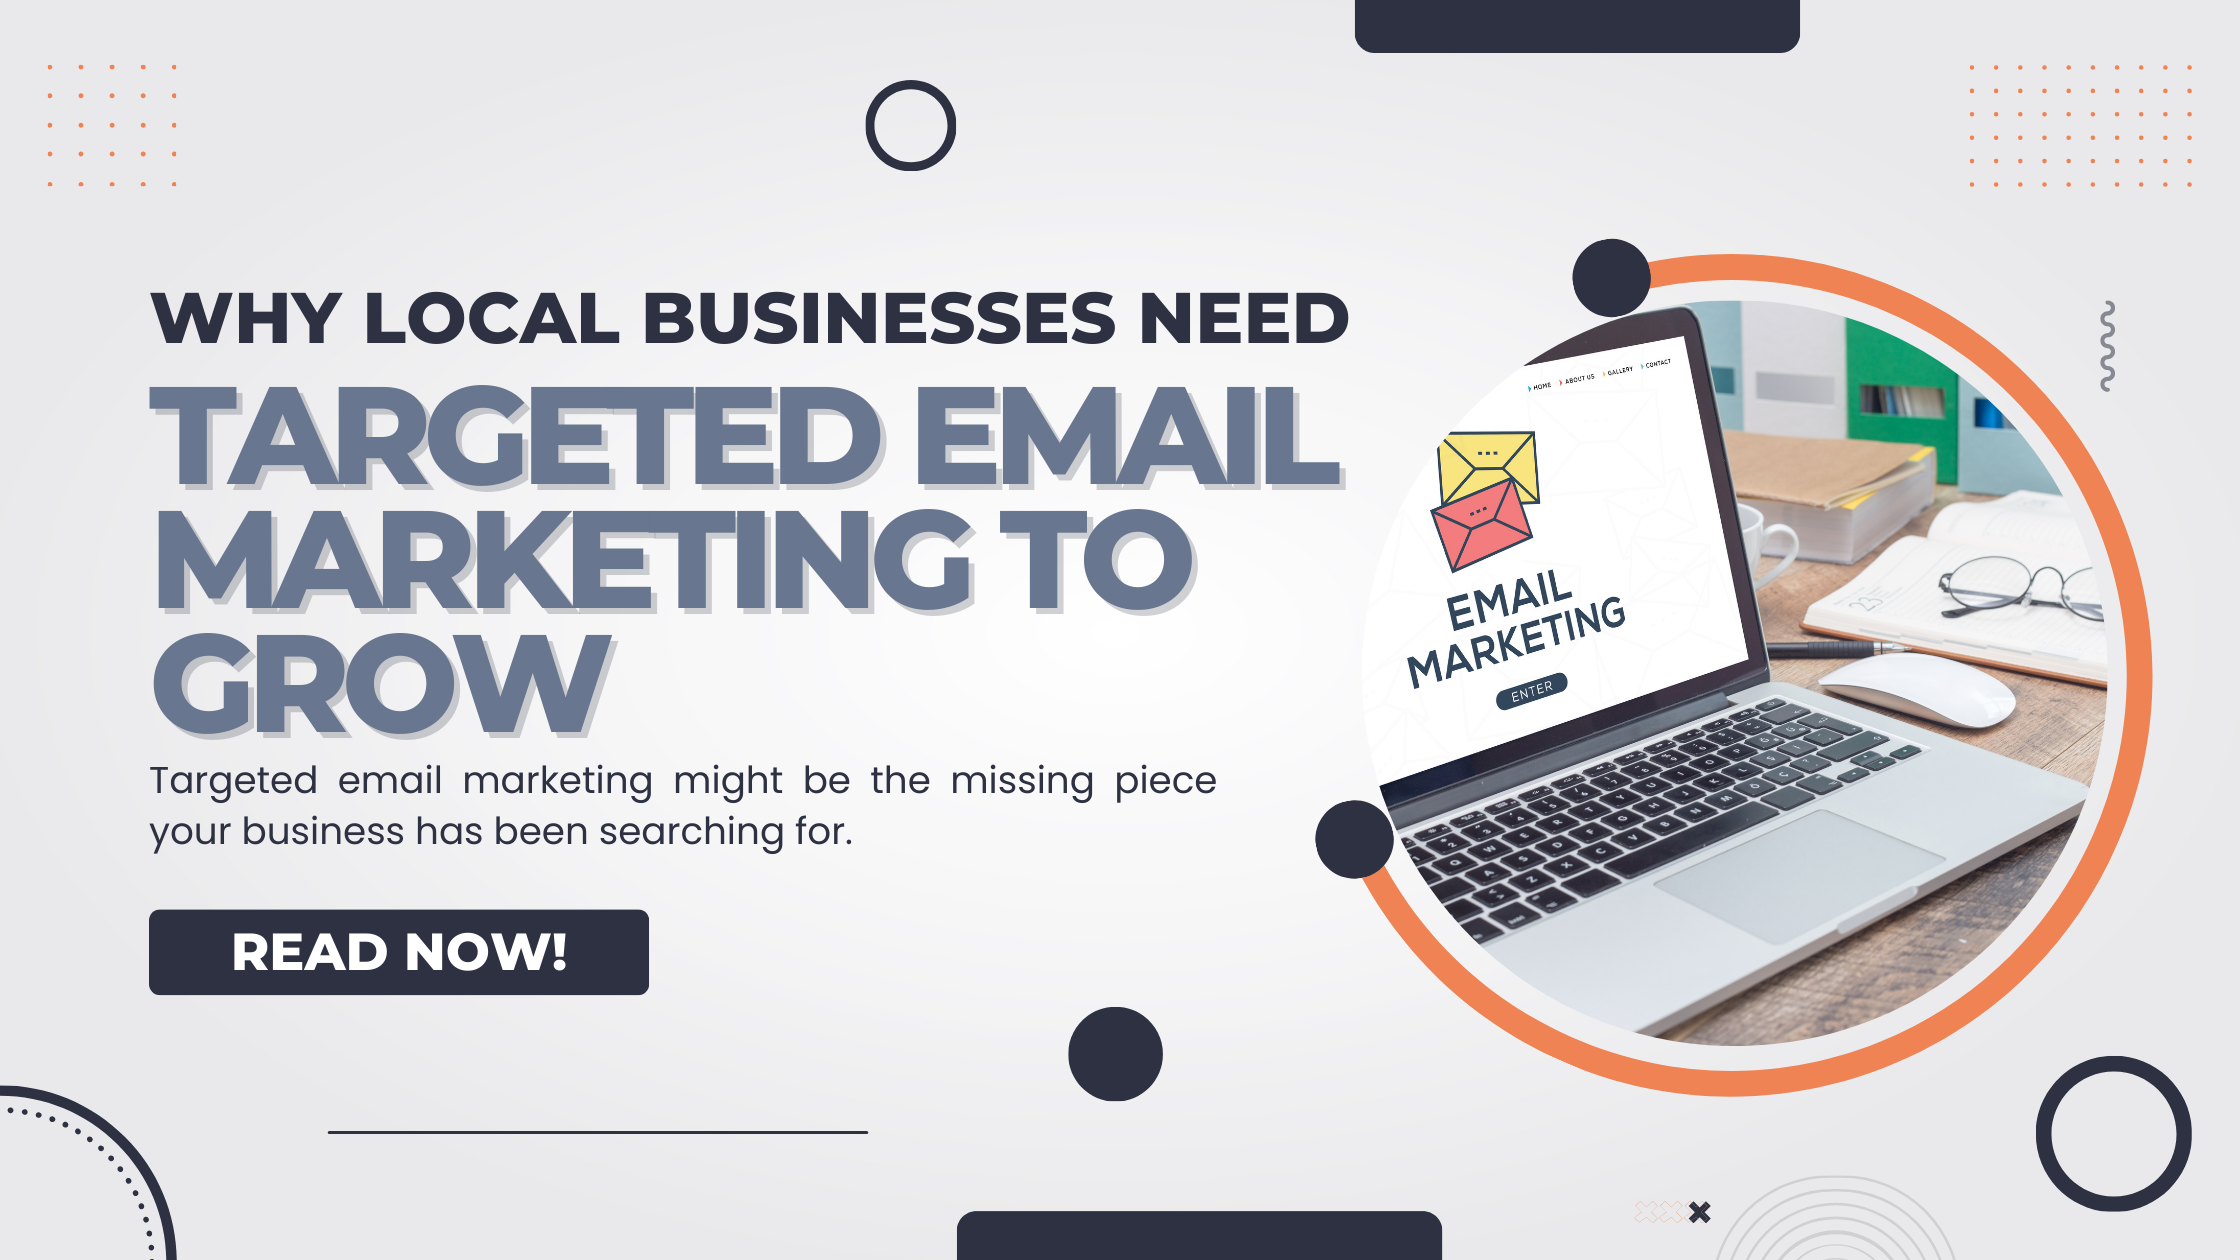 Why Local Businesses Need Targeted Email Marketing To Grow